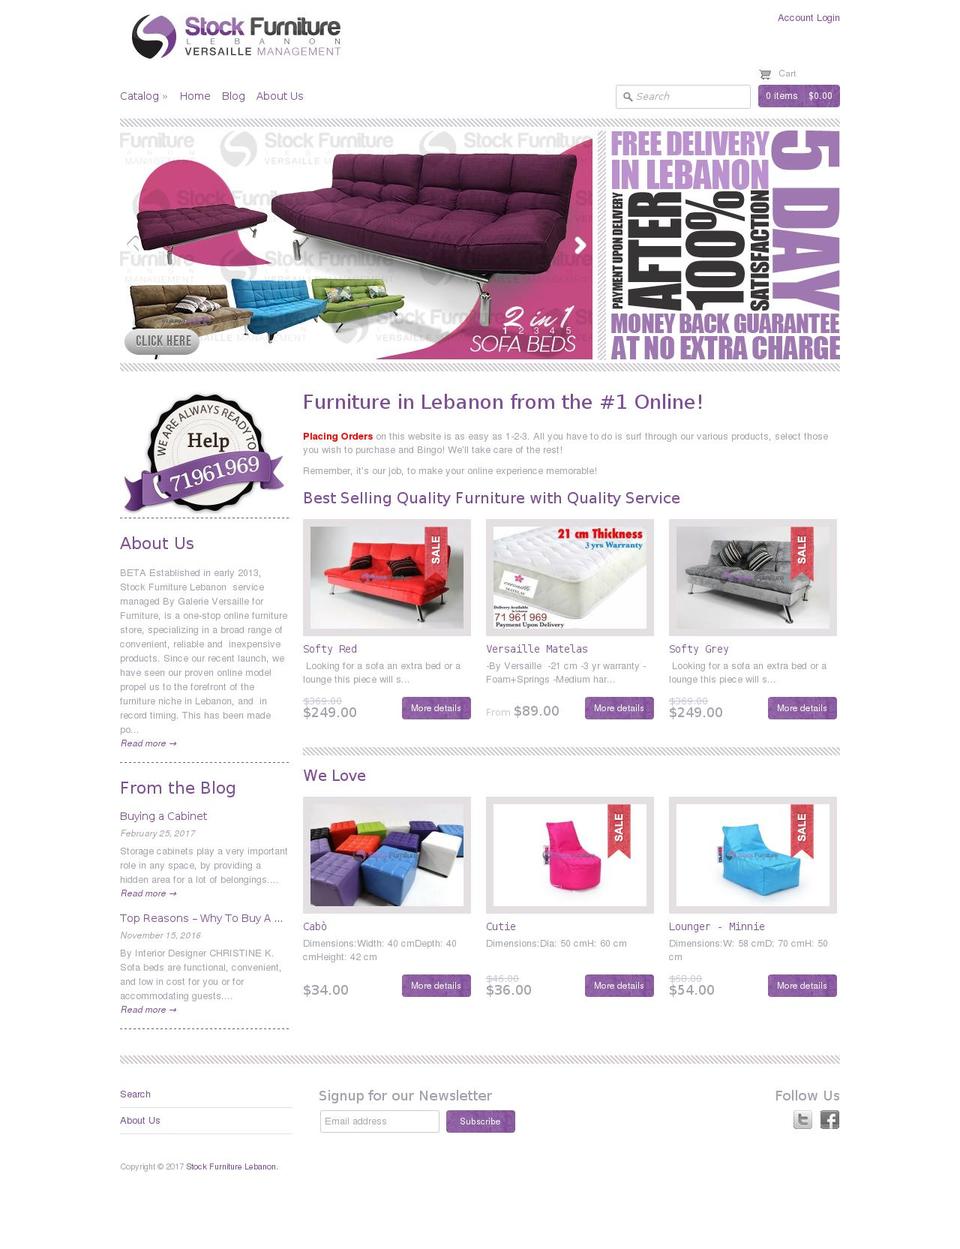 Expression Shopify theme site example stock-furniture.com